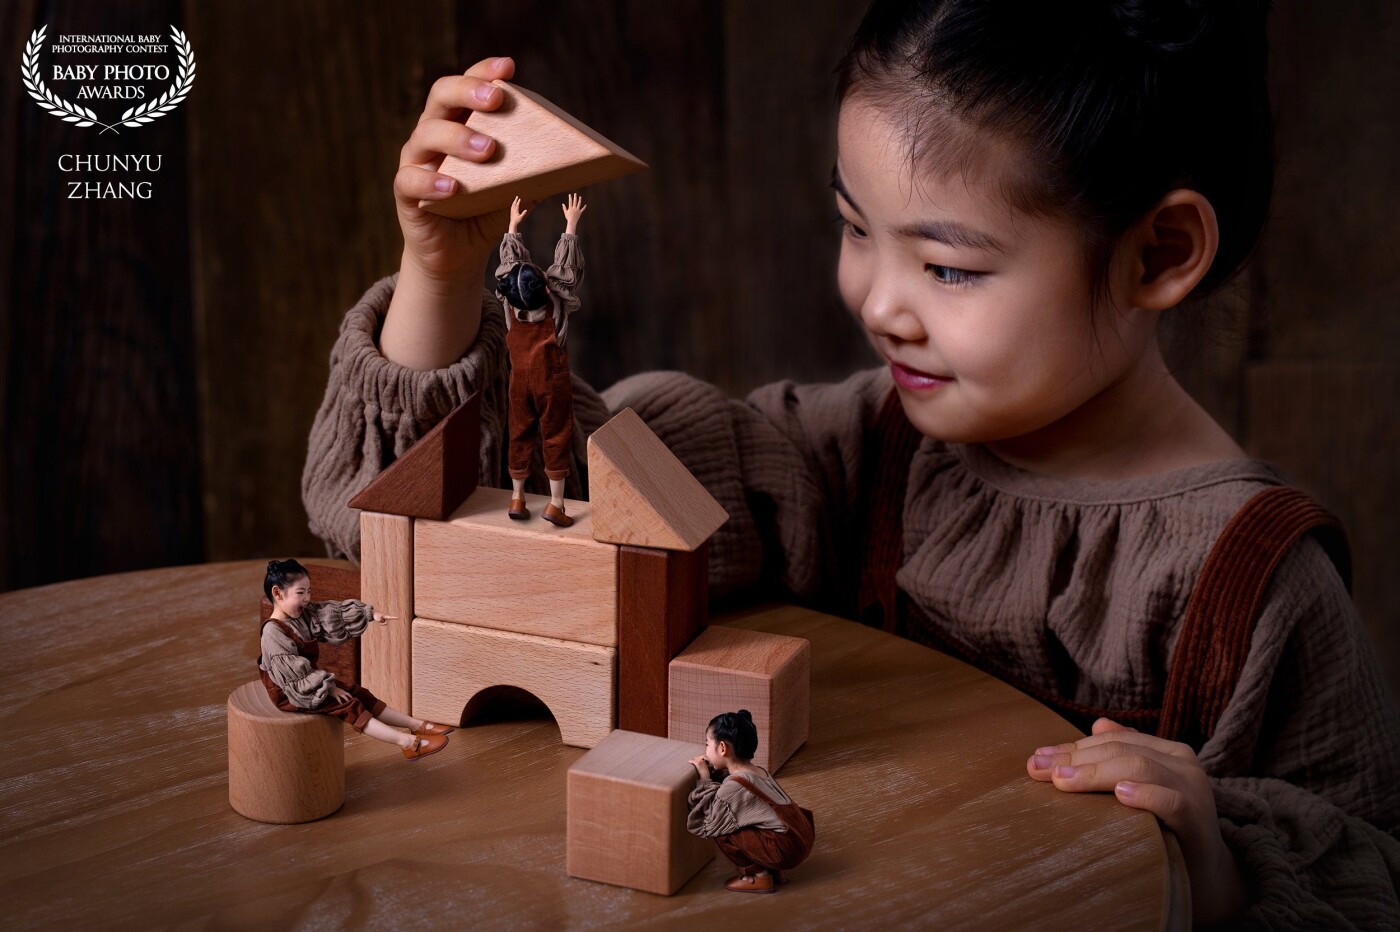 A beautiful girl is building blocks. Her dexterous hands are busy in "Building Block World".Look!  She is also the little one. One is playing peekaboo, the other is doing some some lifting work.